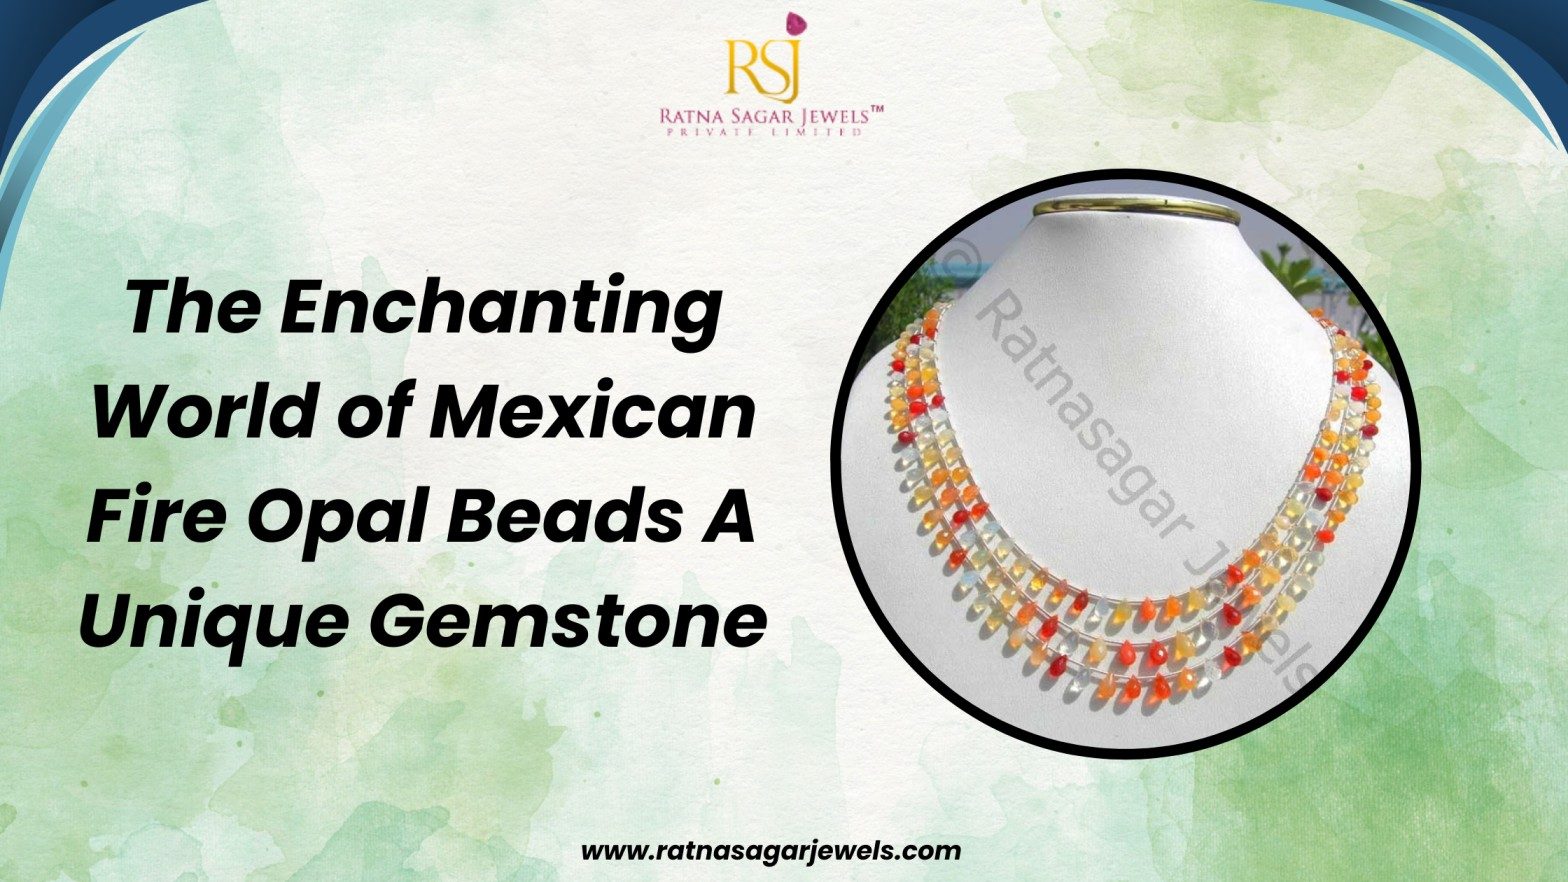 The Enchanting World of Mexican Fire Opal Beads: A Unique Gemstone